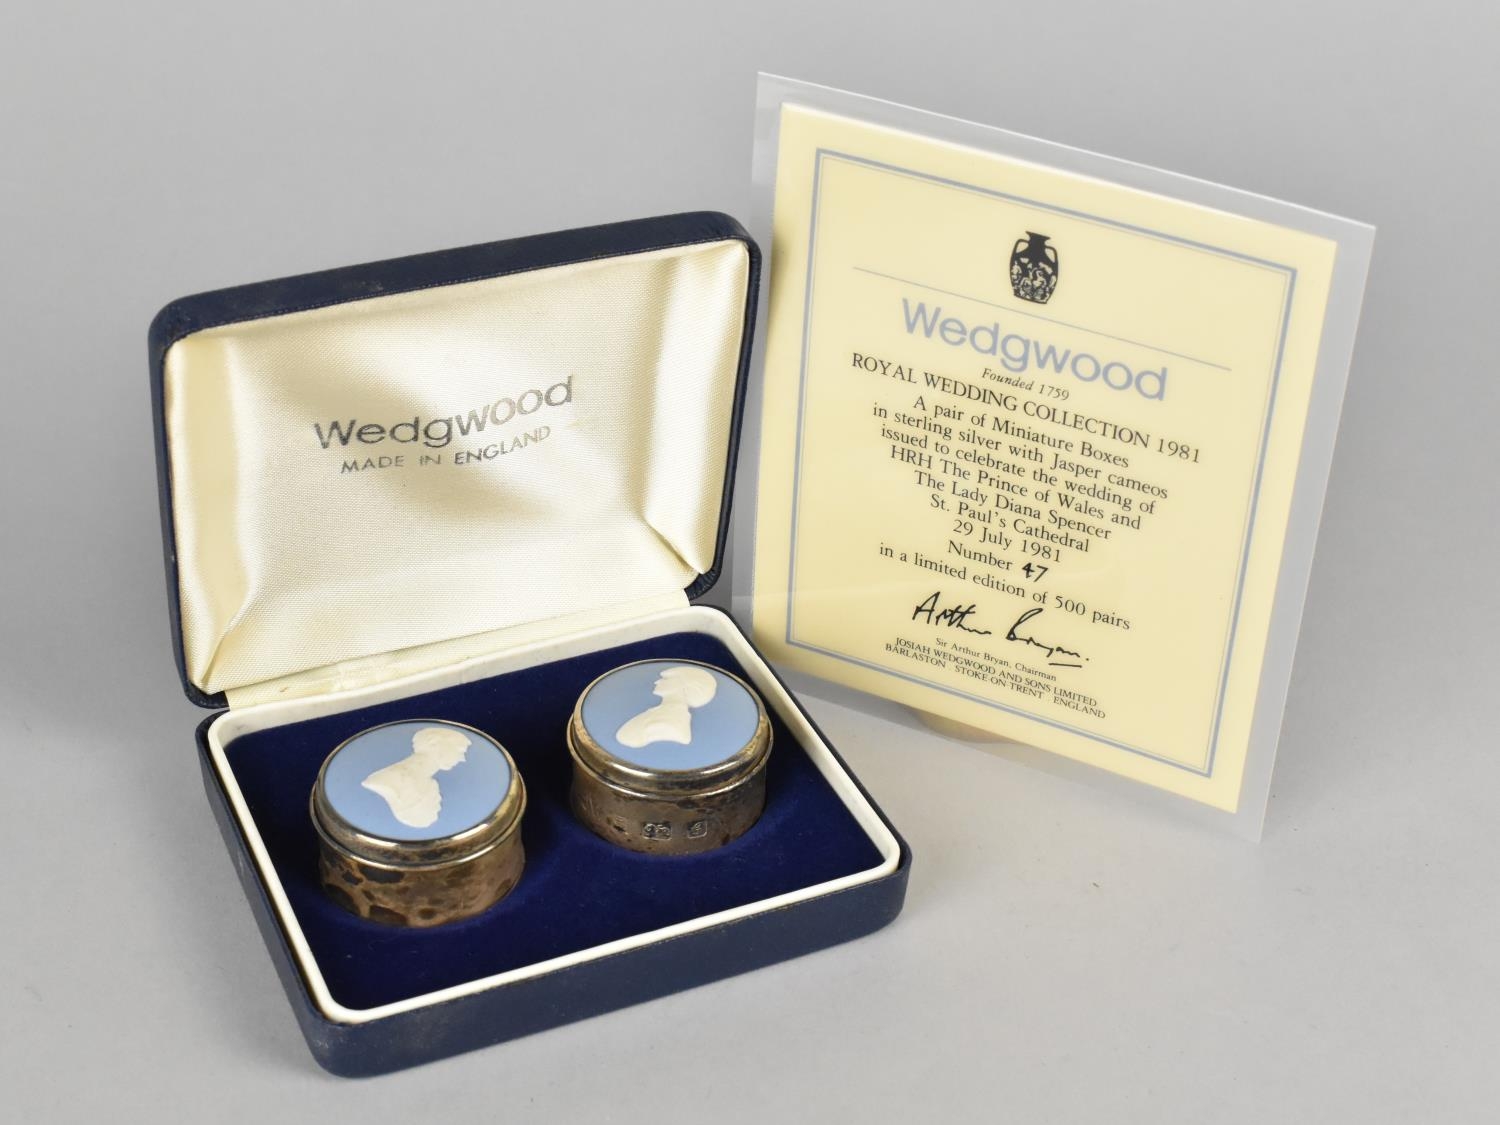 A Pair of Silver and Wedgwood Jasperware Cameo Topped Boxes to Commemorate the Royal Wedding 1981,